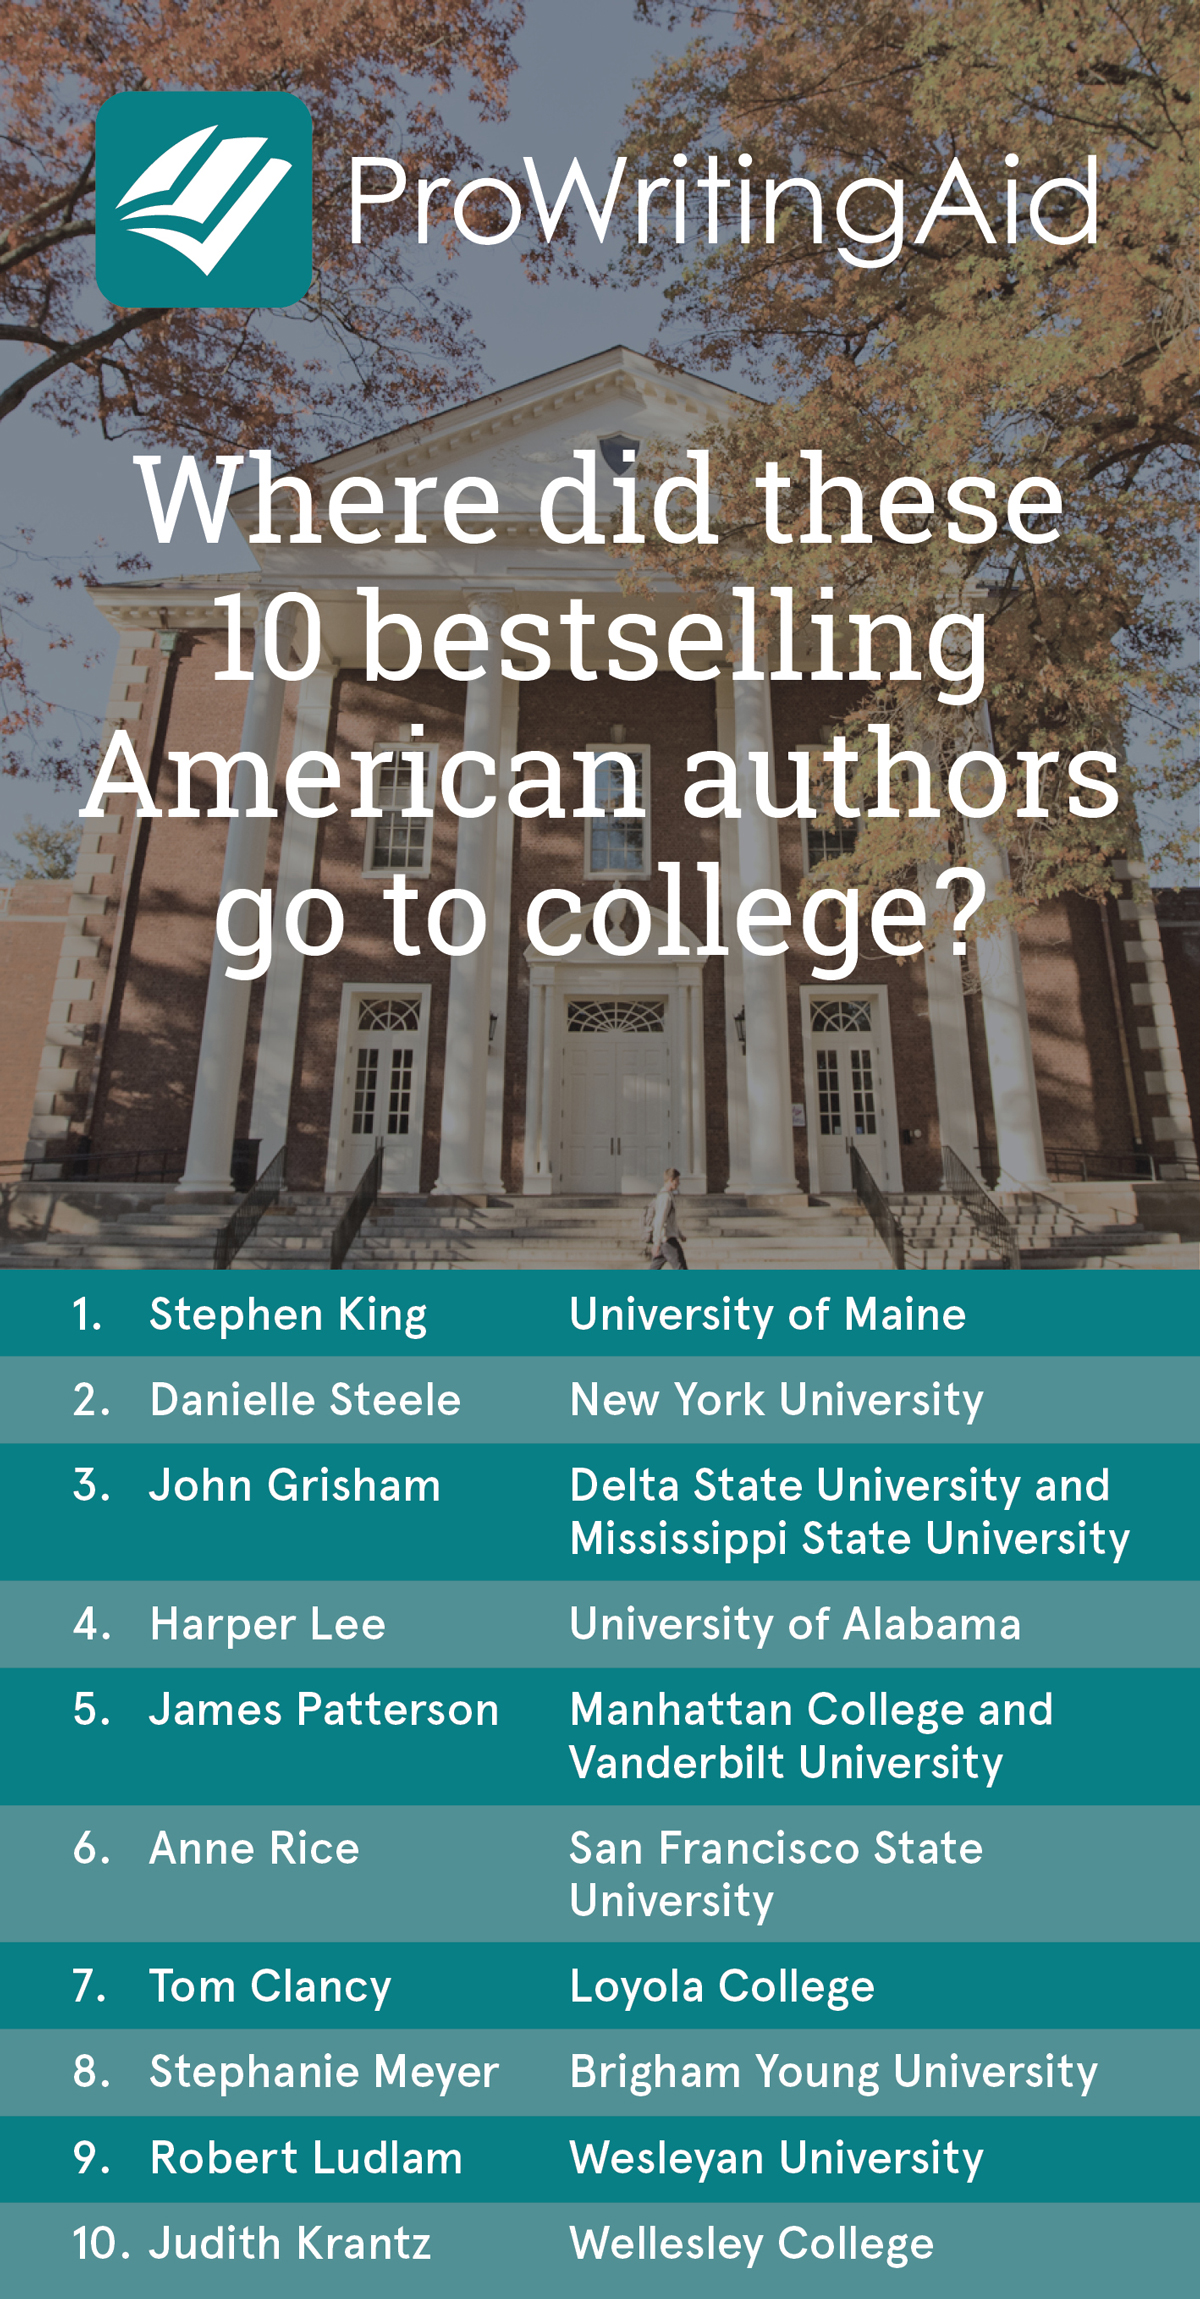 Where did these bestselling American authors go to college?